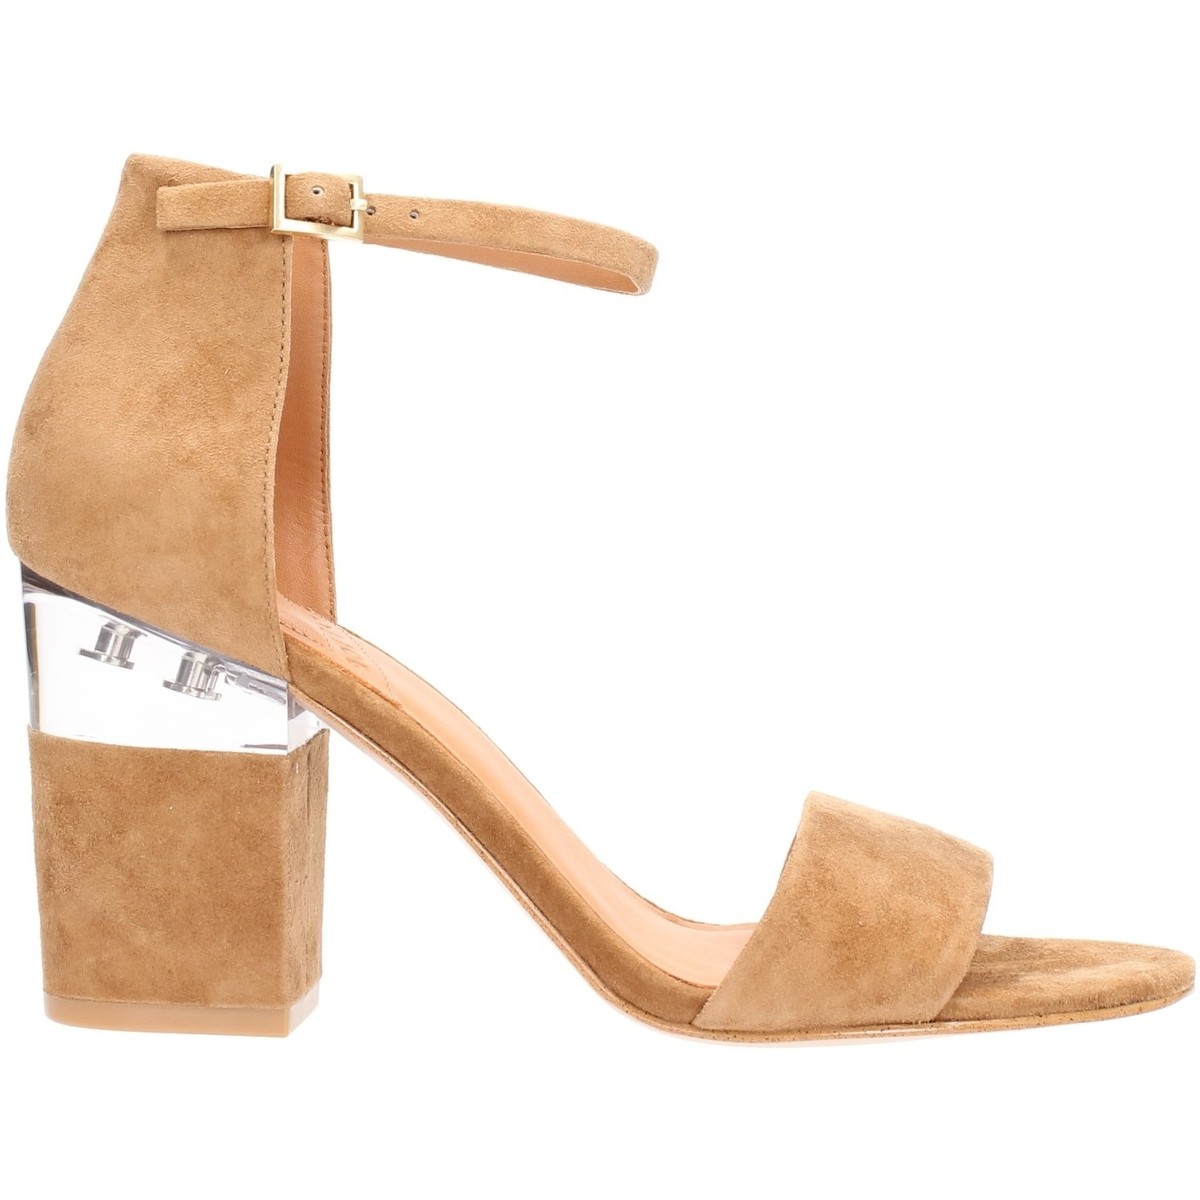 Chaussures Femme Loints Of Holla  Beige